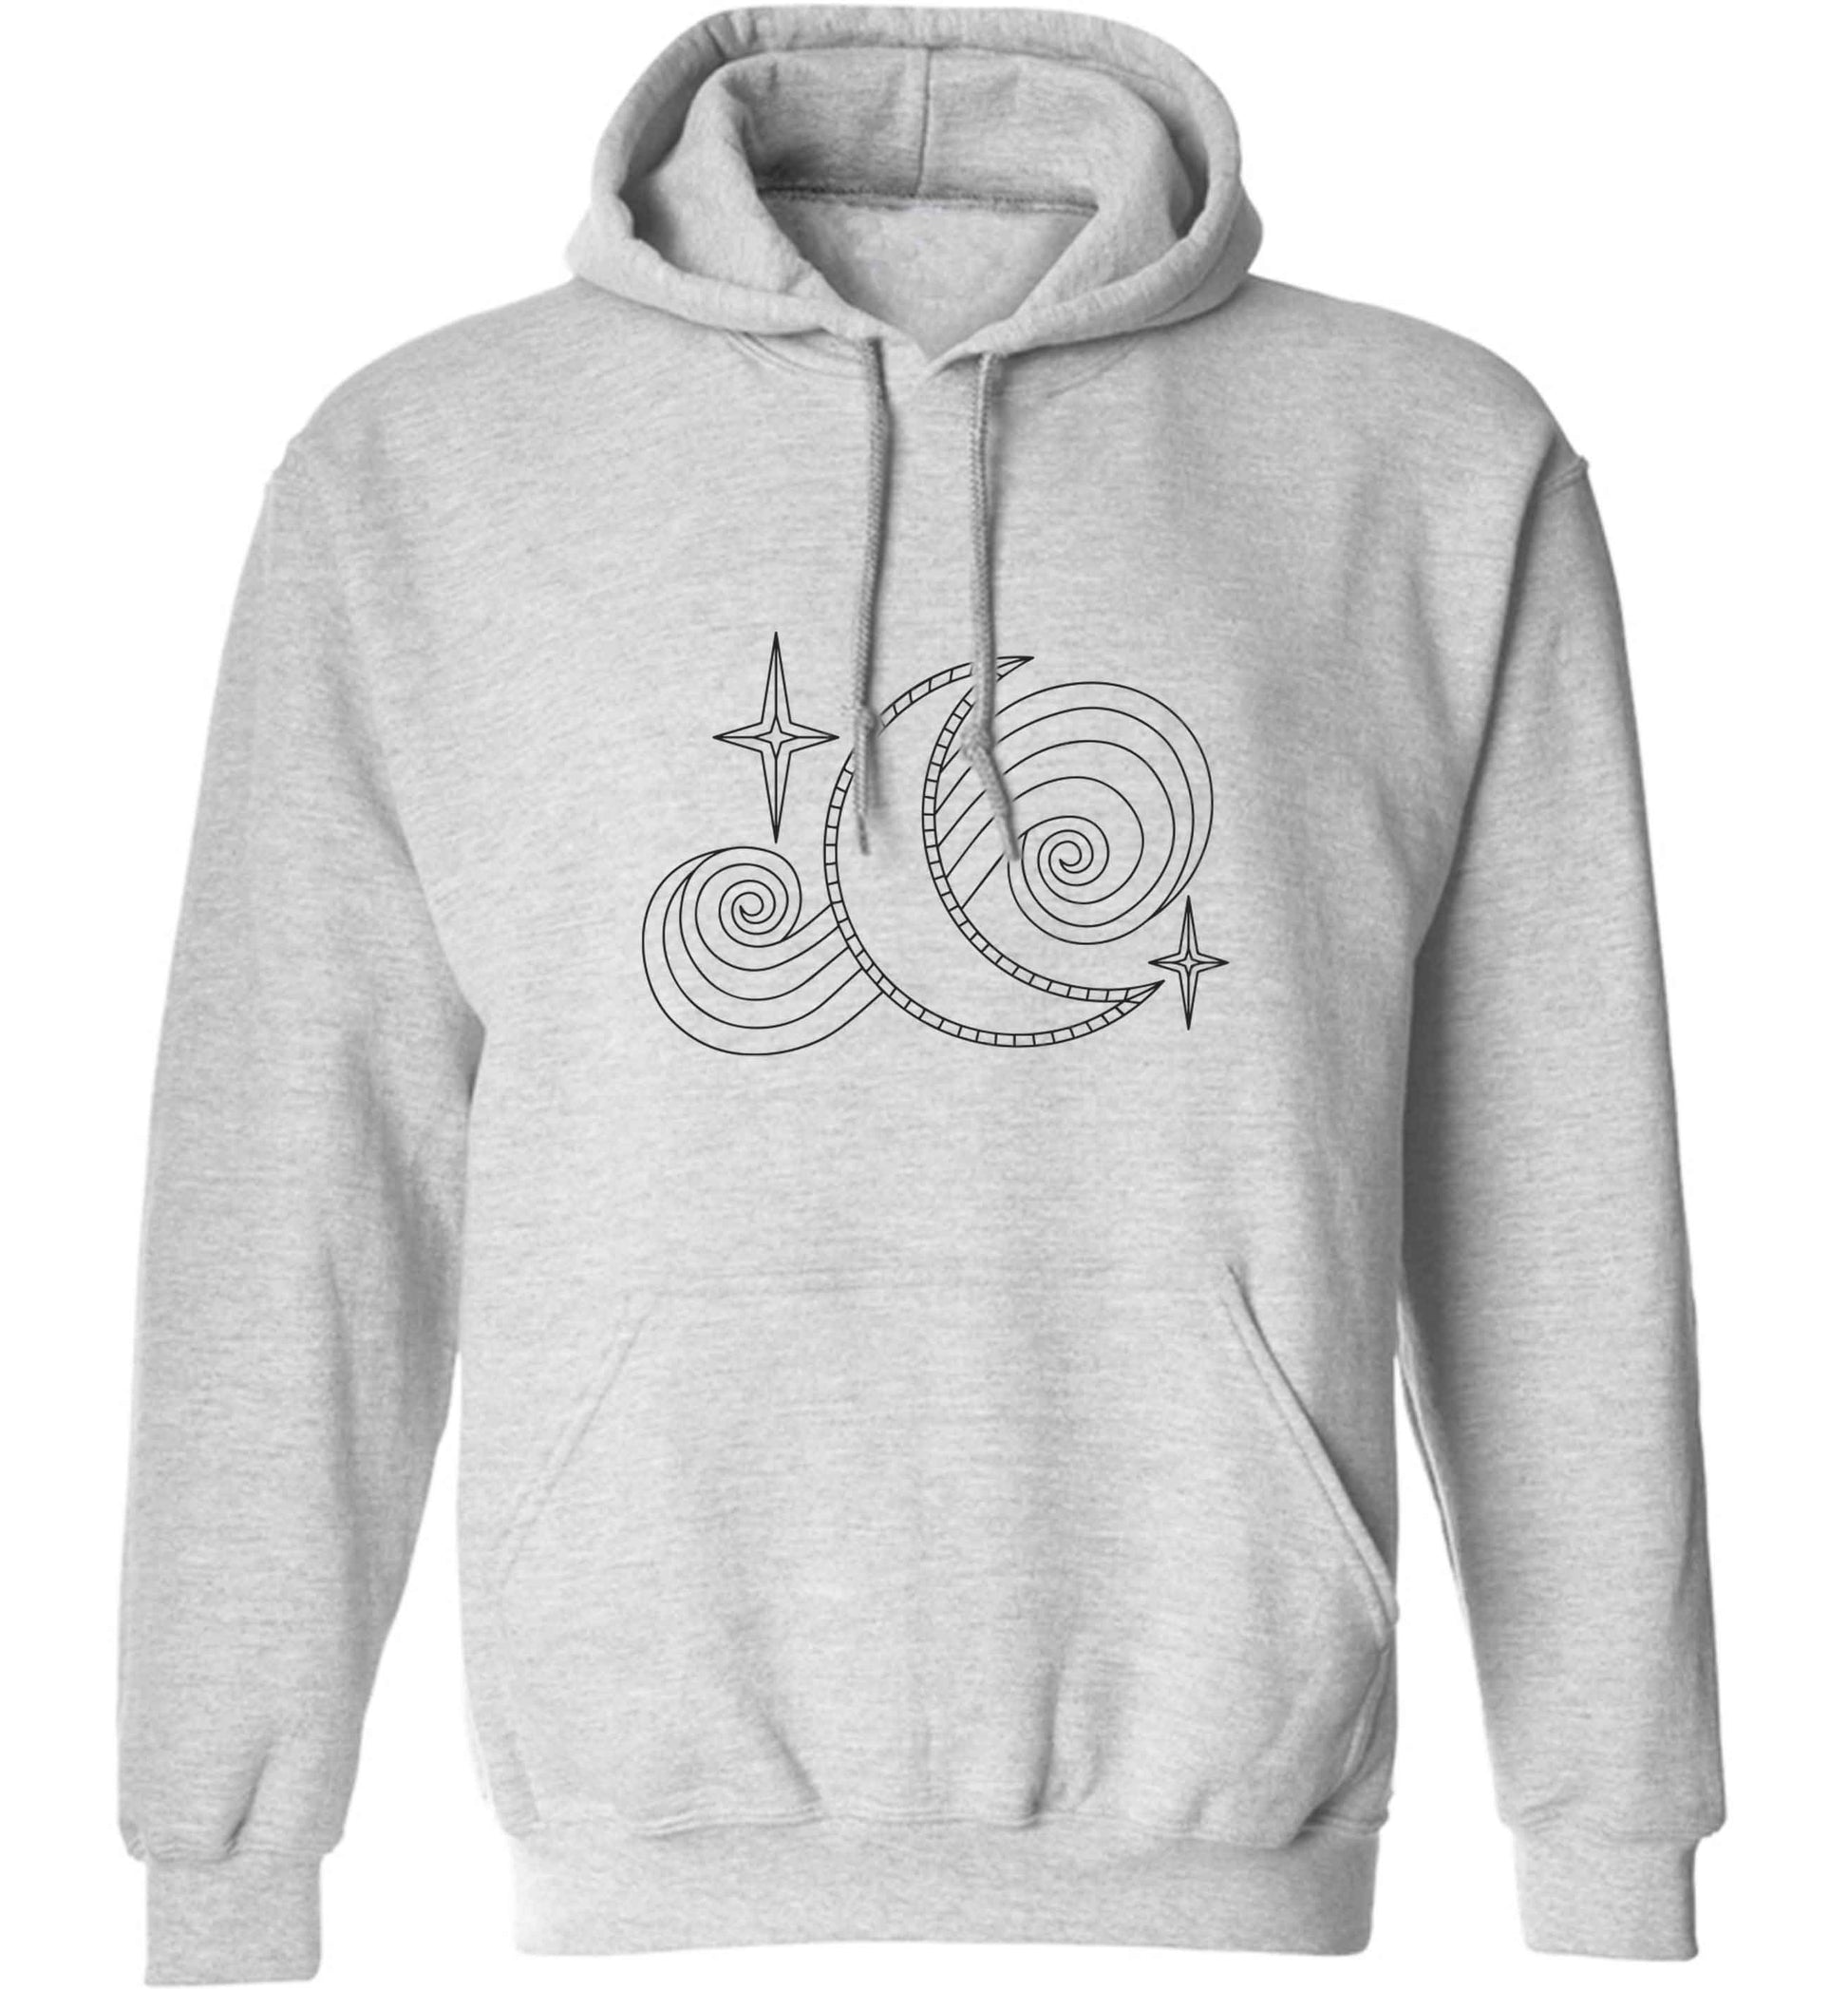 Moon and stars illustration adults unisex grey hoodie 2XL